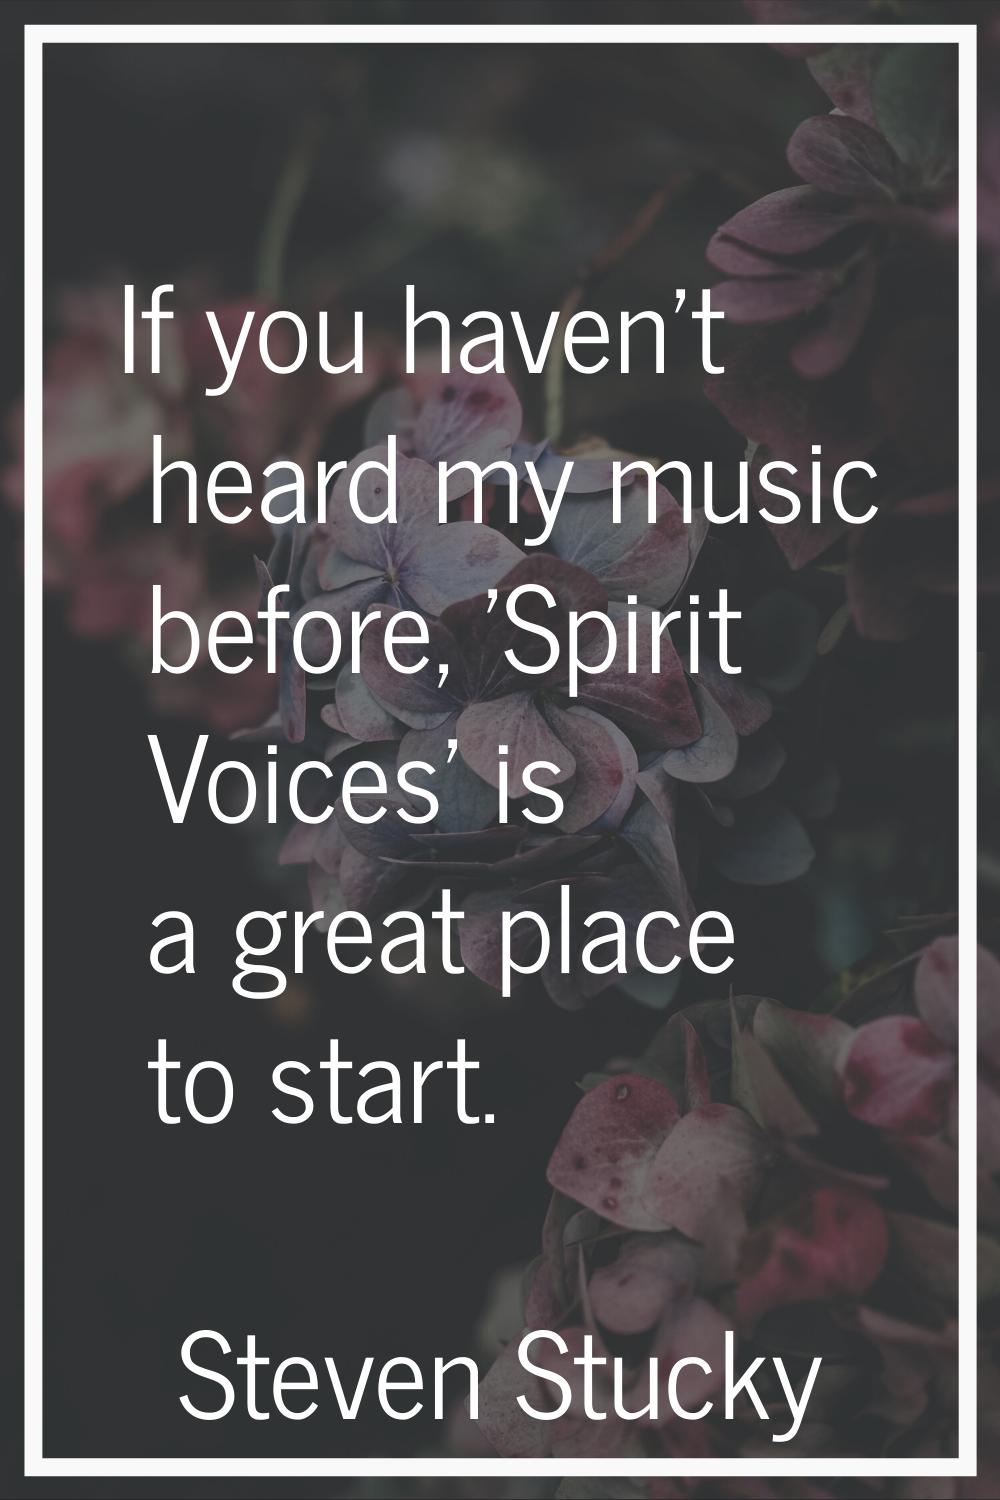 If you haven't heard my music before, 'Spirit Voices' is a great place to start.